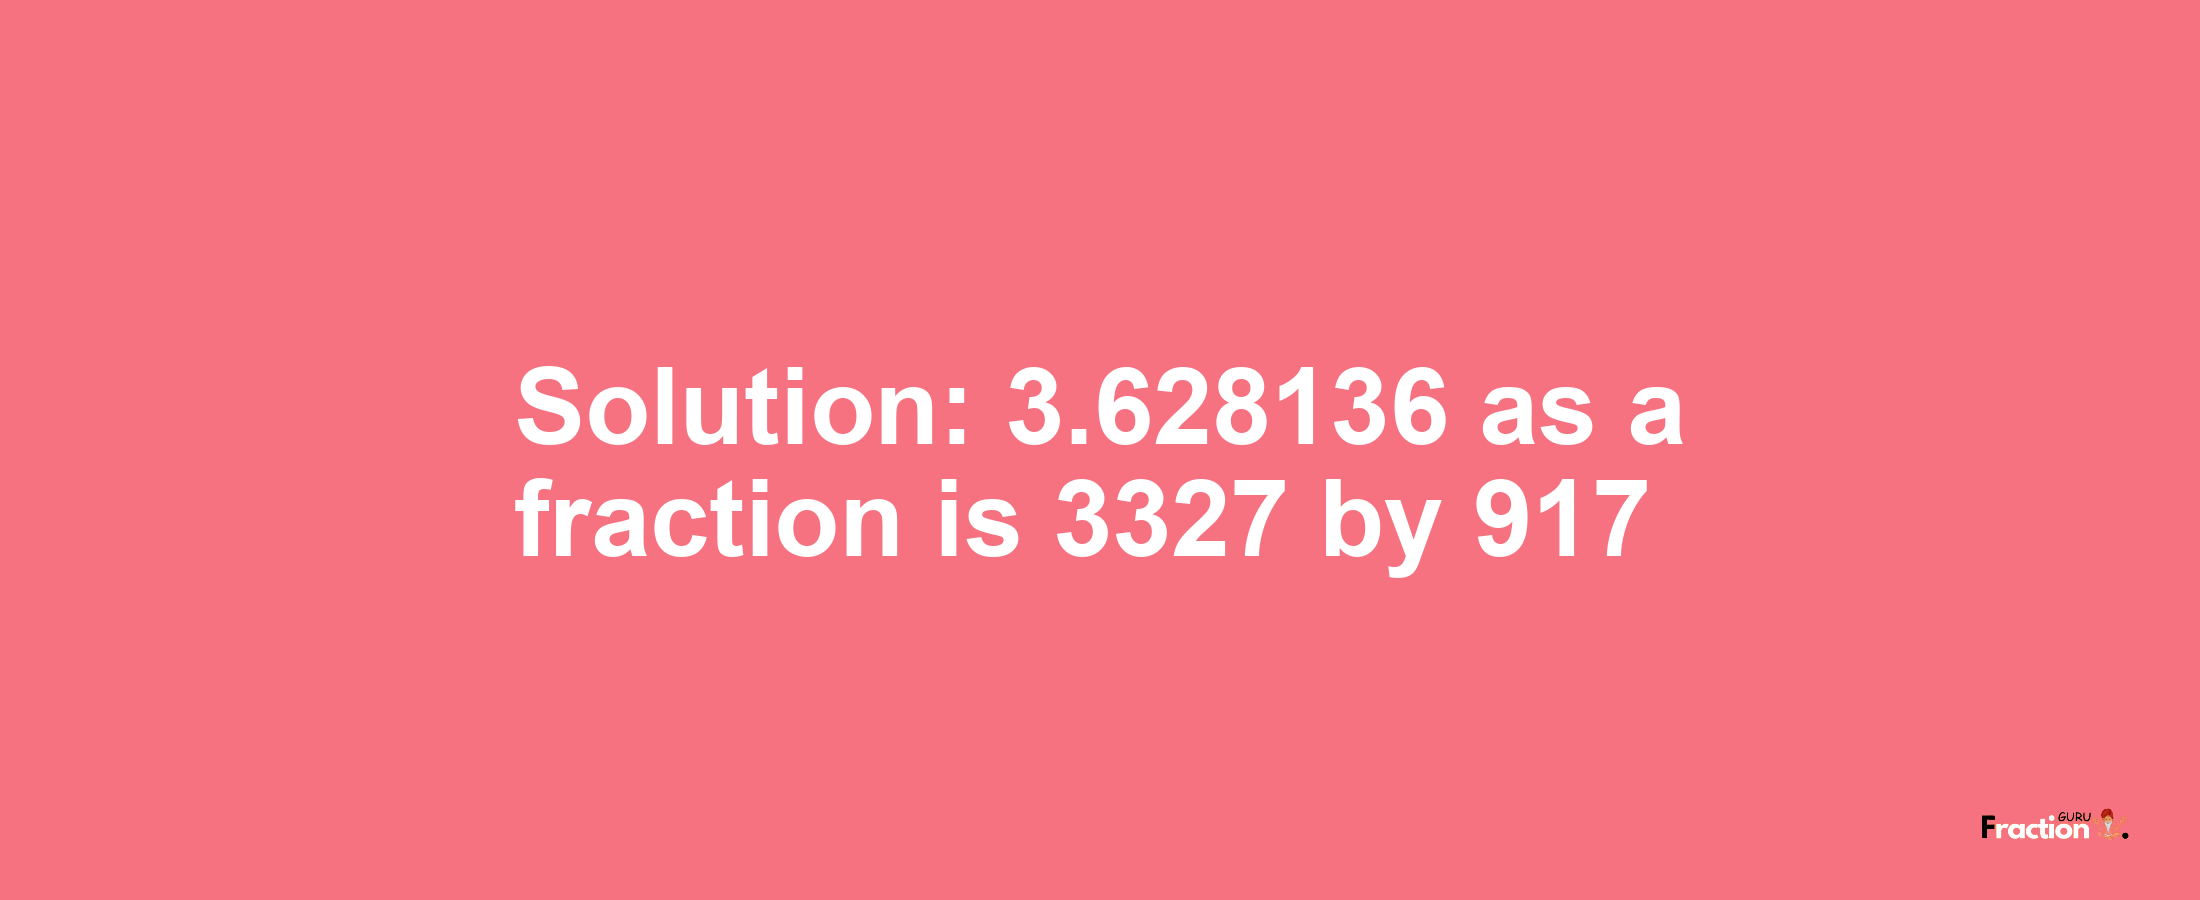 Solution:3.628136 as a fraction is 3327/917